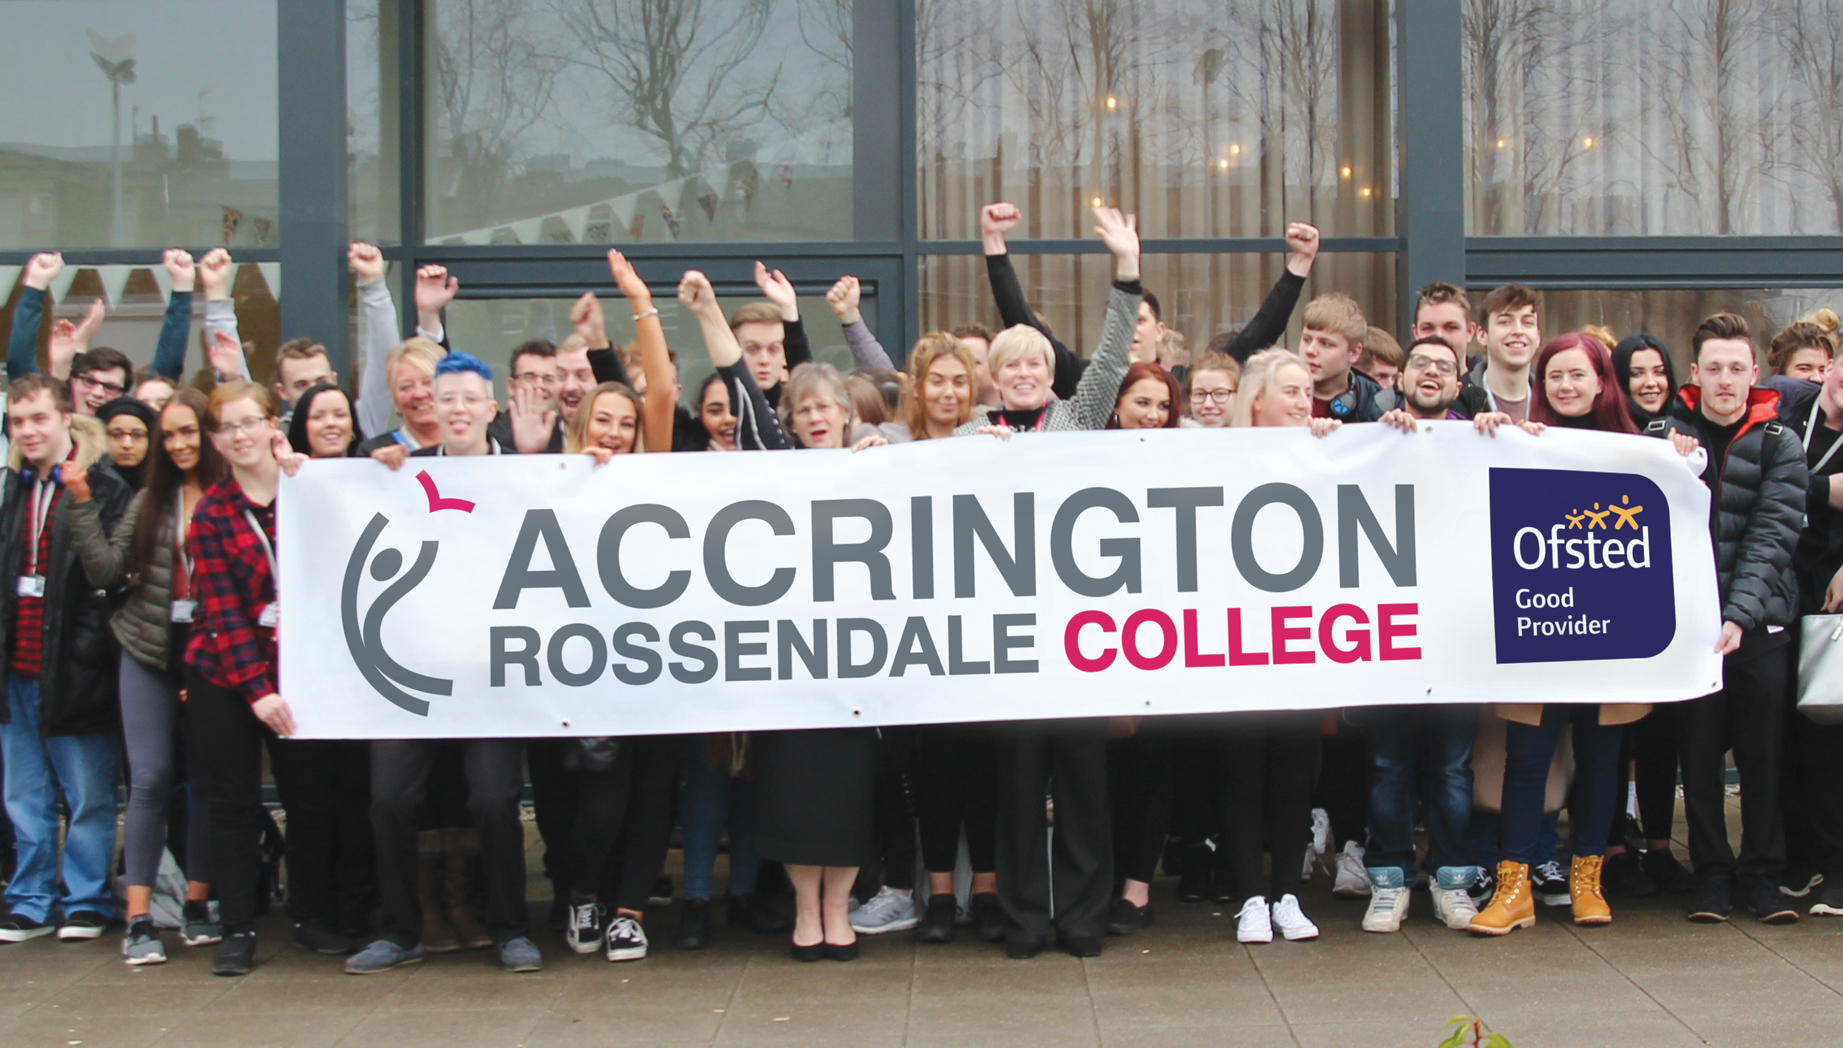 Accrington and Rossendale College are making good progress’ – Ofsted